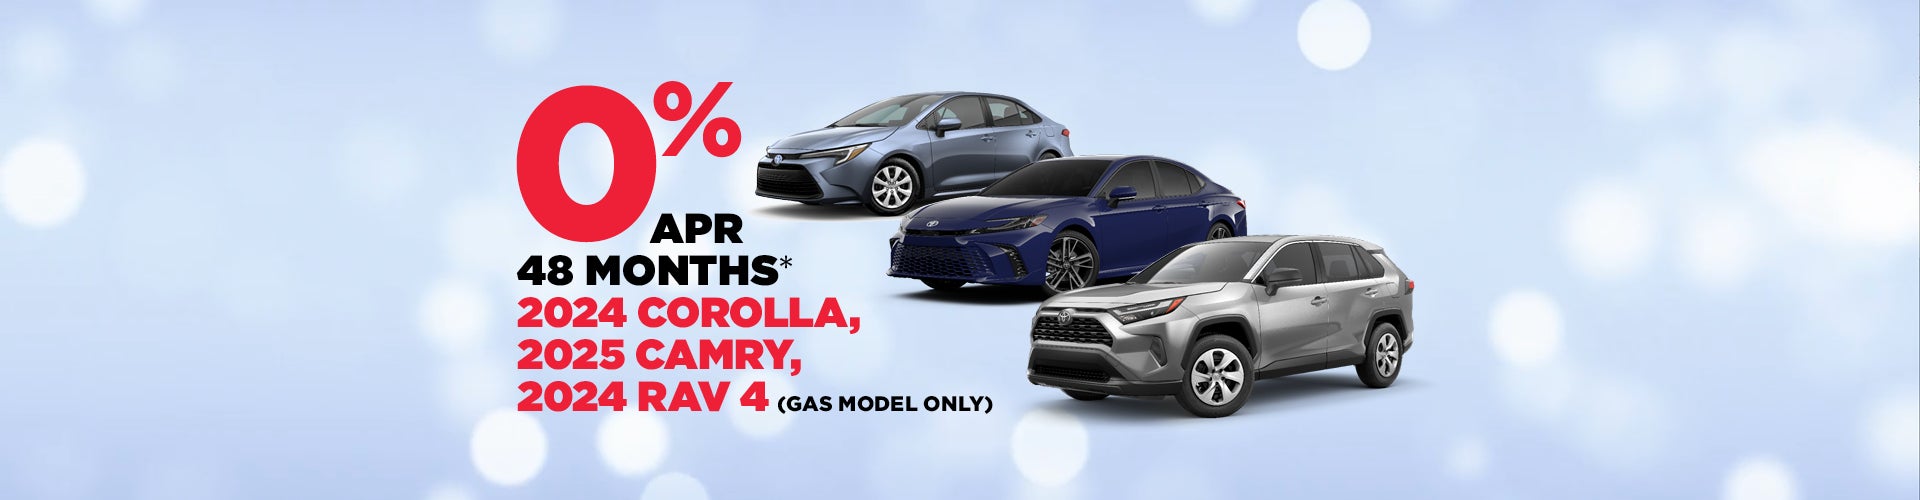 New ’24 Corolla, RAV4 (gas only) or ’25 Camry